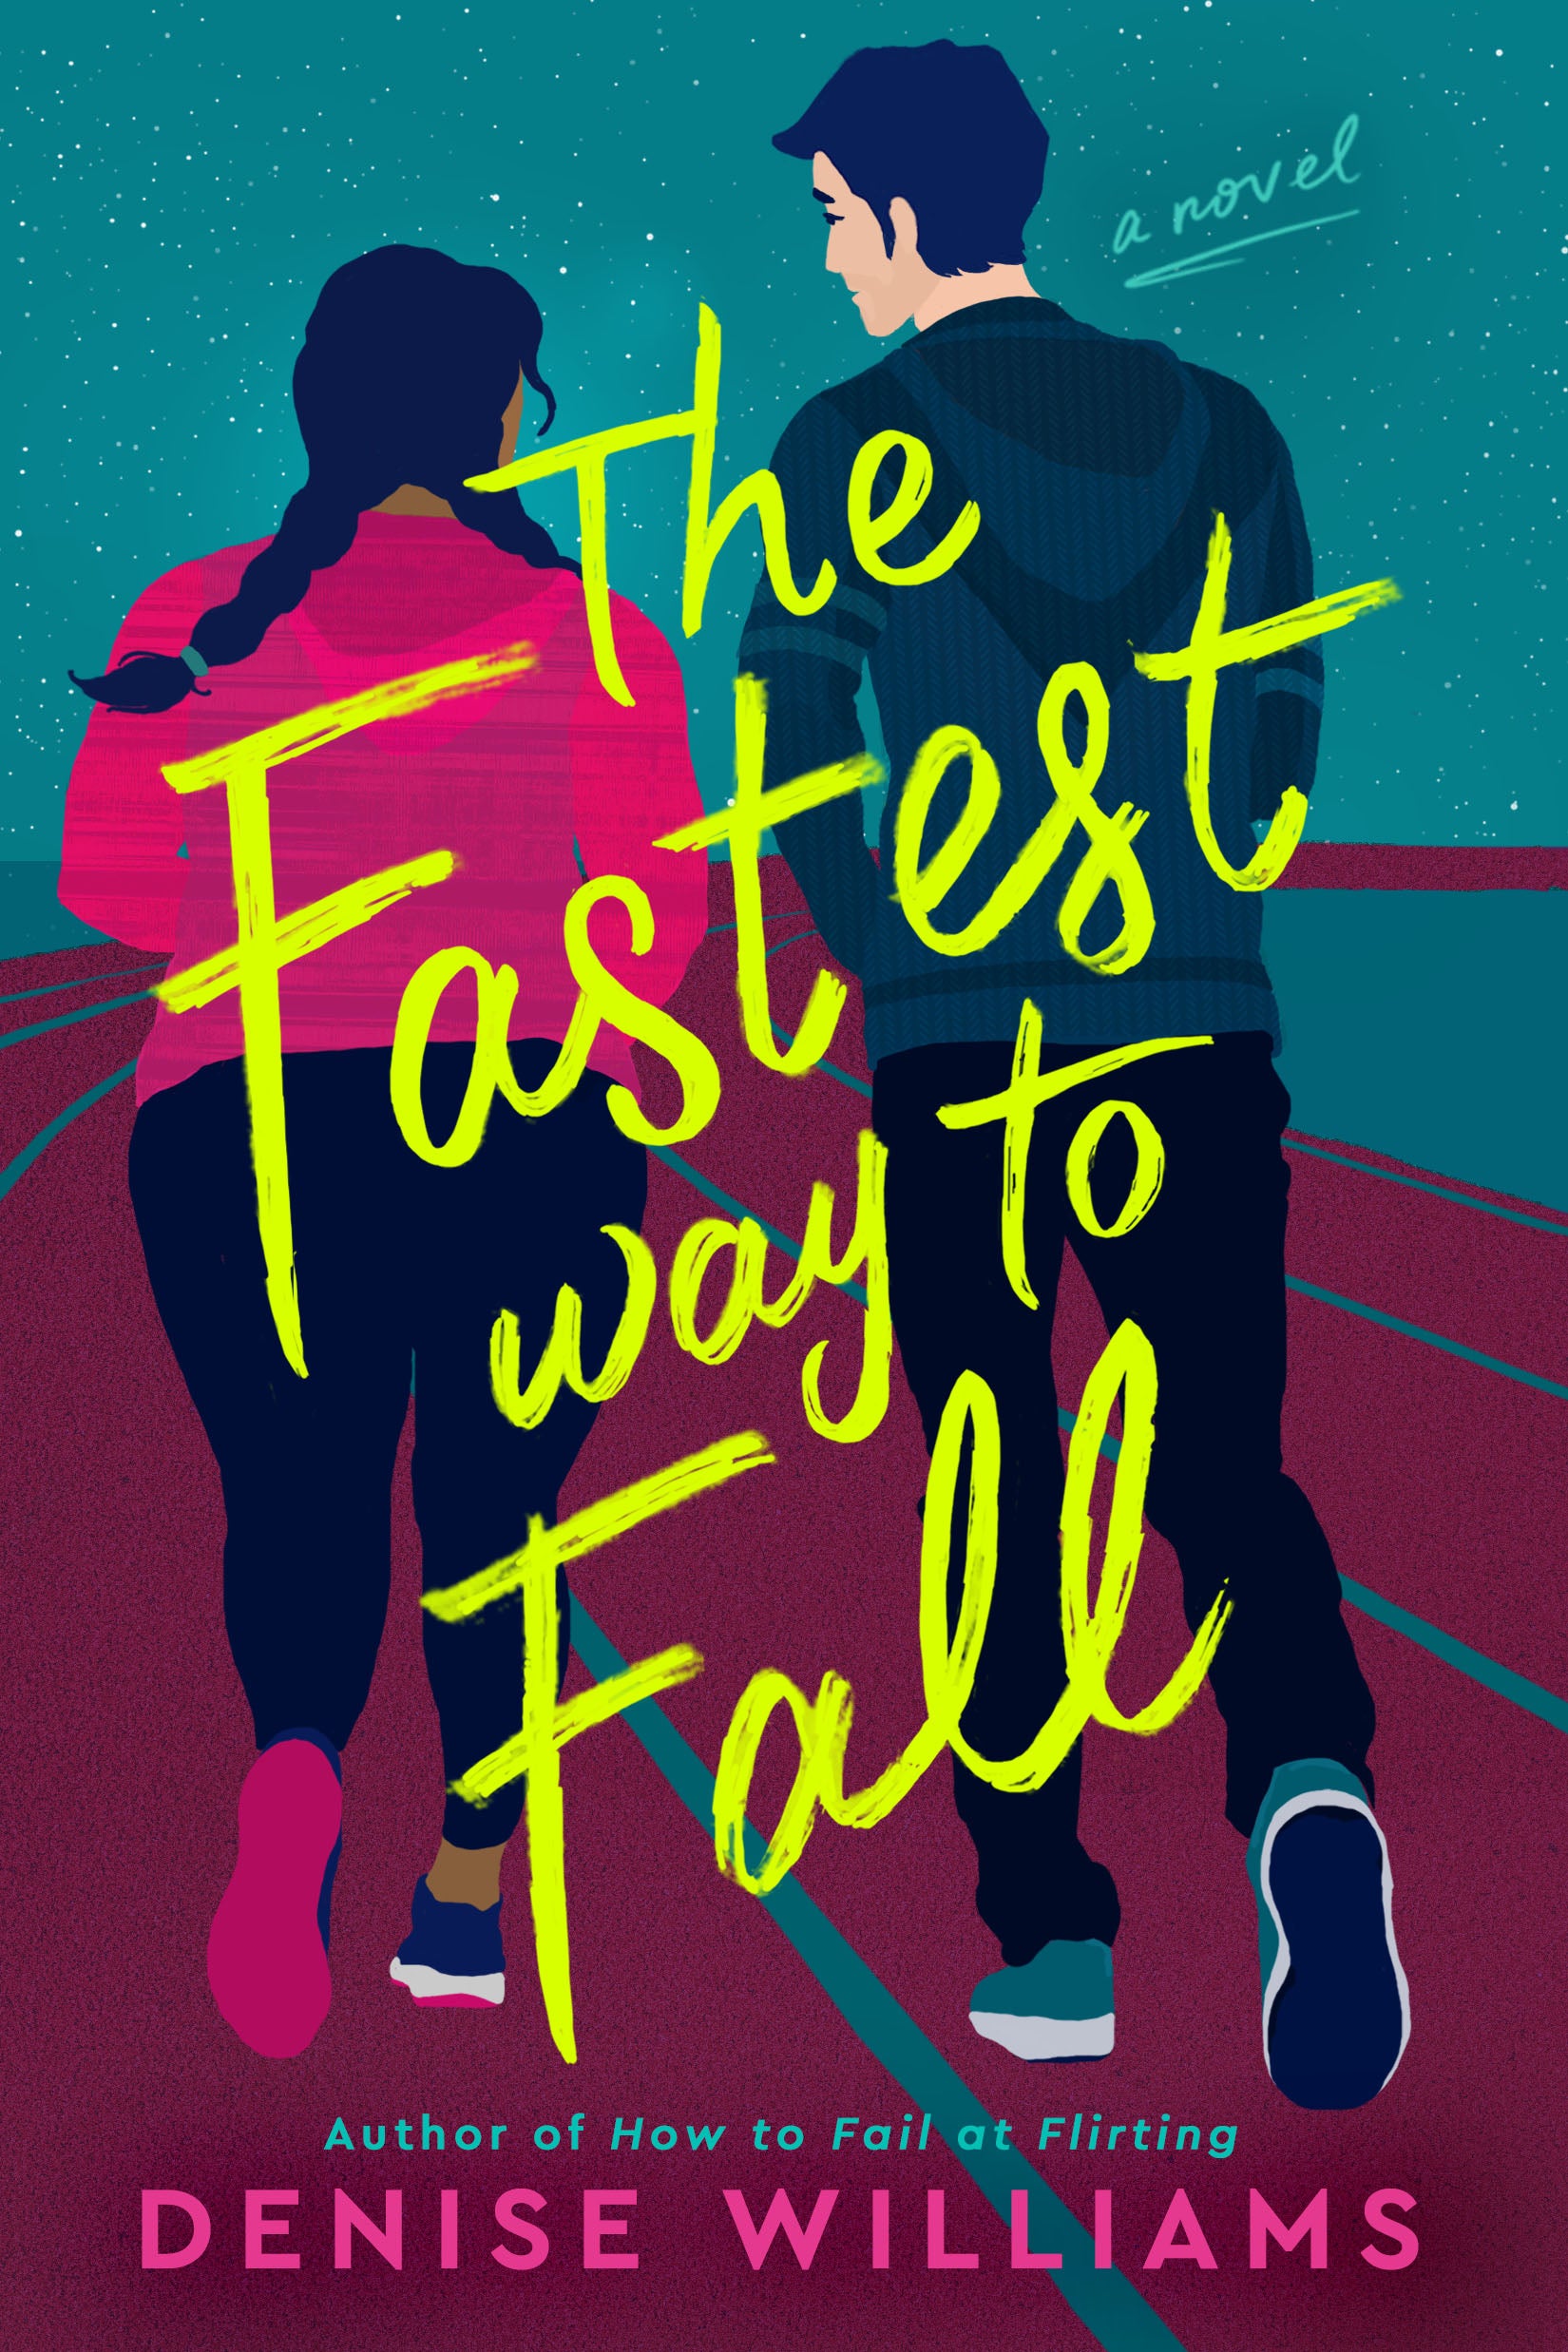 Fasted Way to Fall by Denise Williams